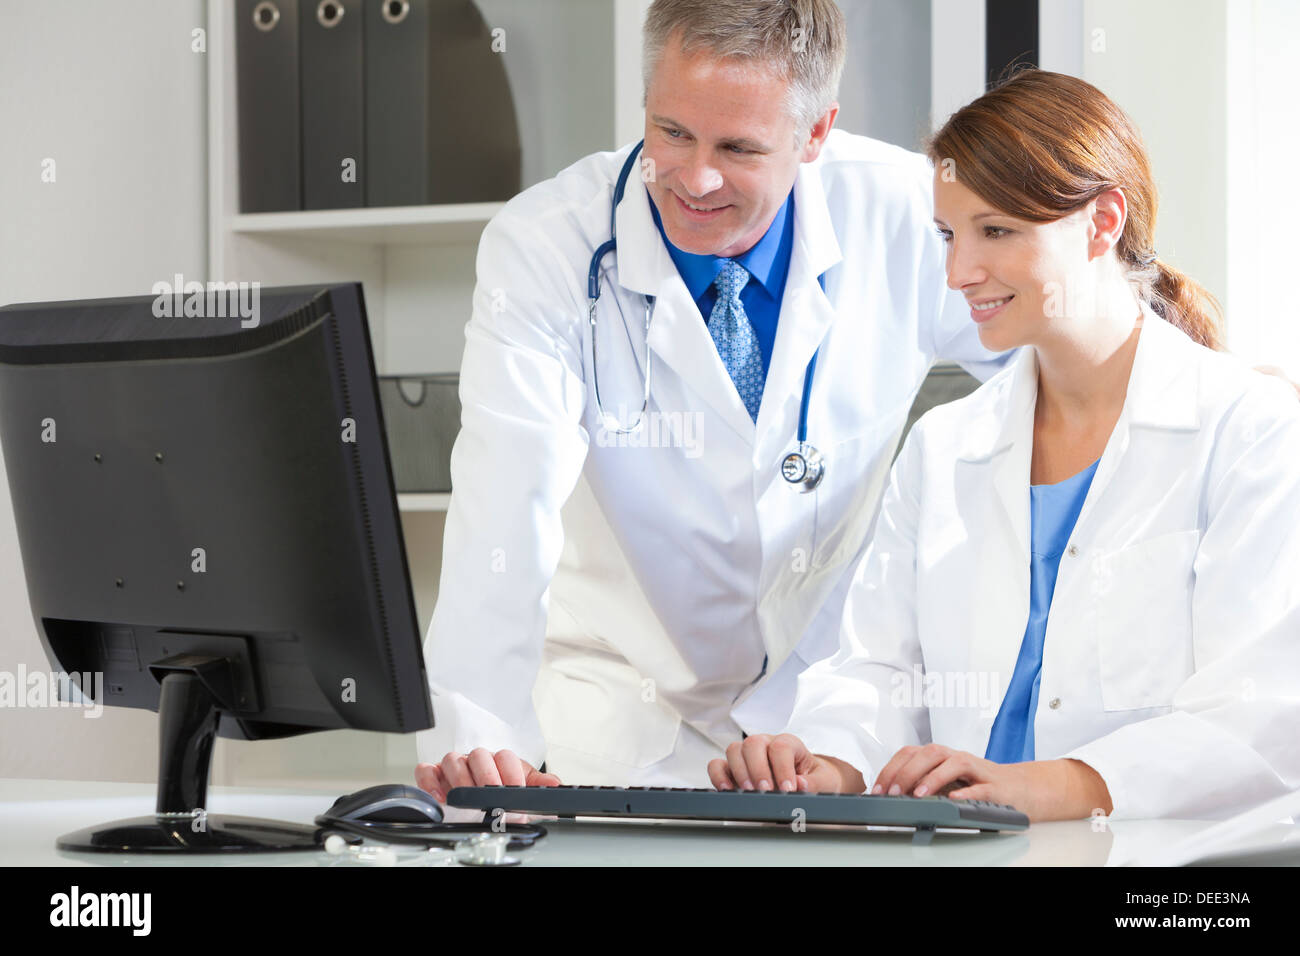 Male & female medical doctors using computer in a hospital office Stock  Photo - Alamy